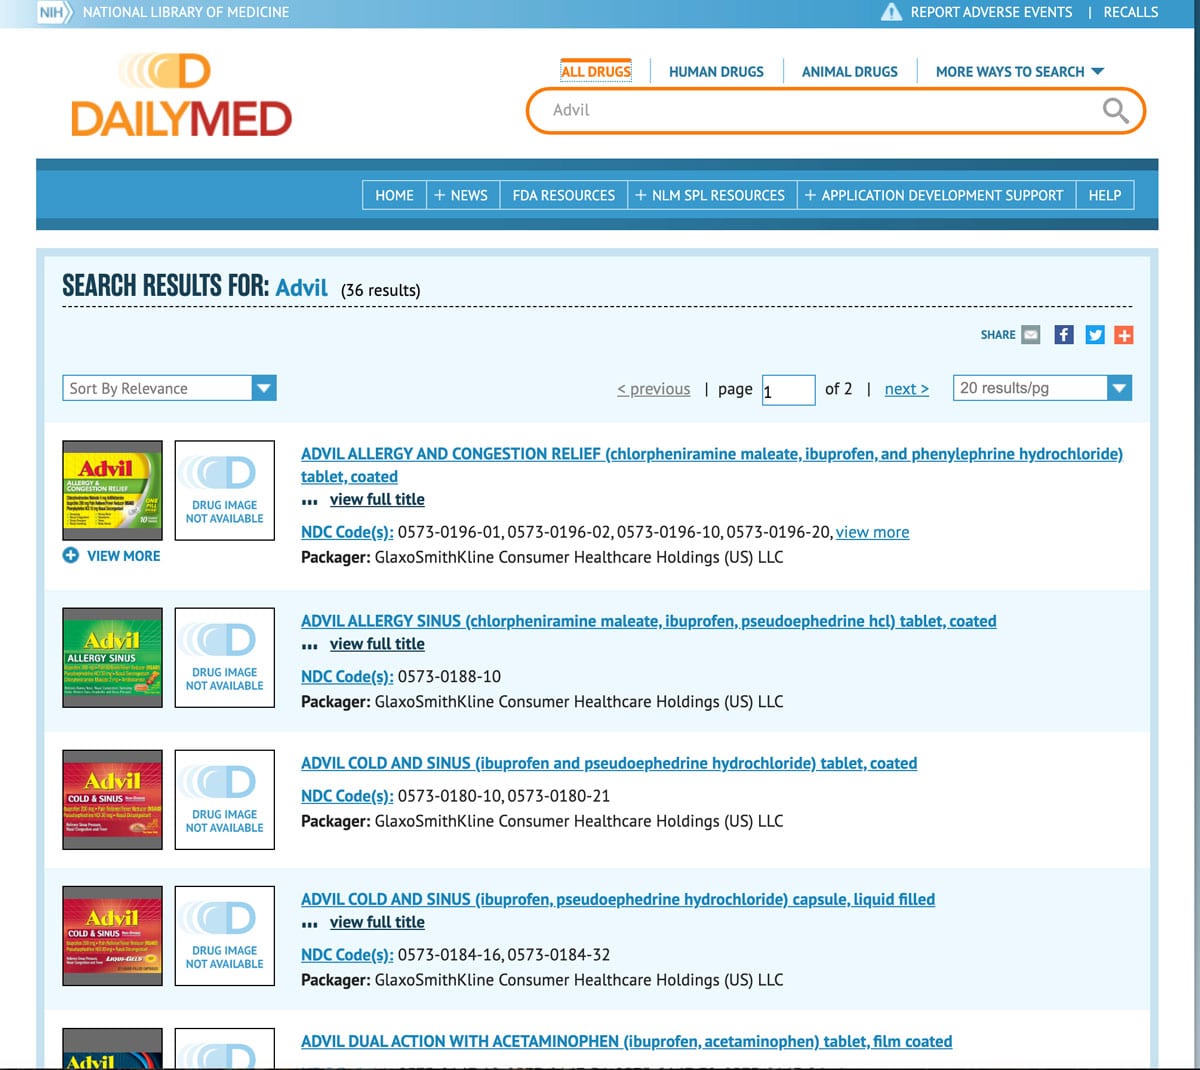 A screenshot from DailyMed showing all of the types of Advil.